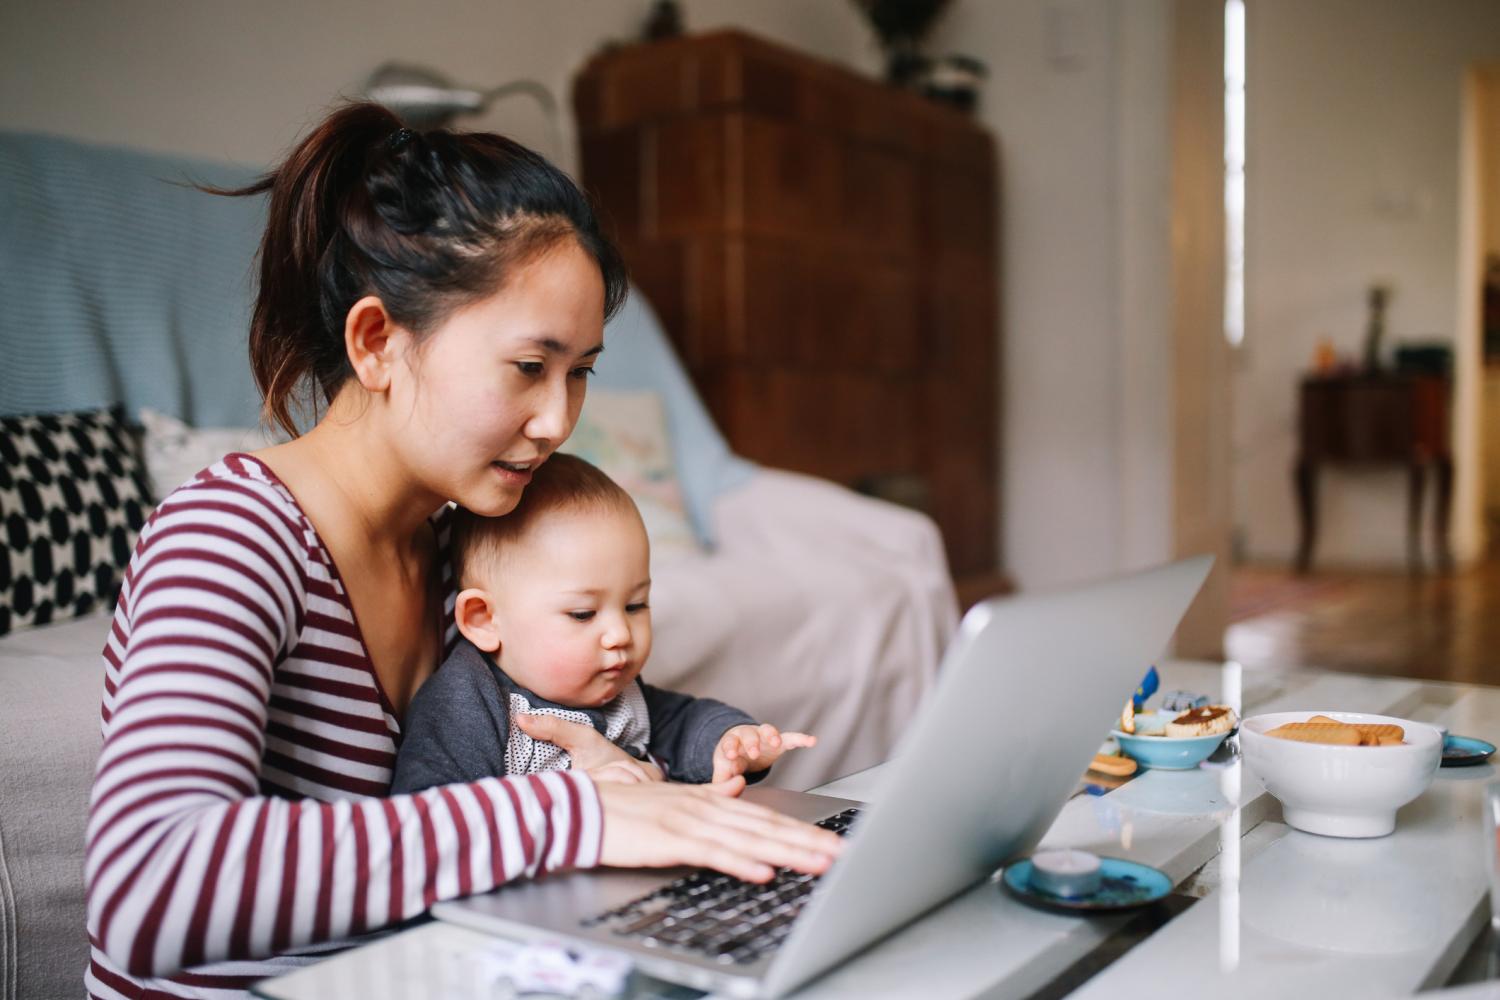 Portrait of a young Asian woman sitting at home, doing some freelance job while taking care of her little baby boy. Home living and lifestyle concepts with Asian people.